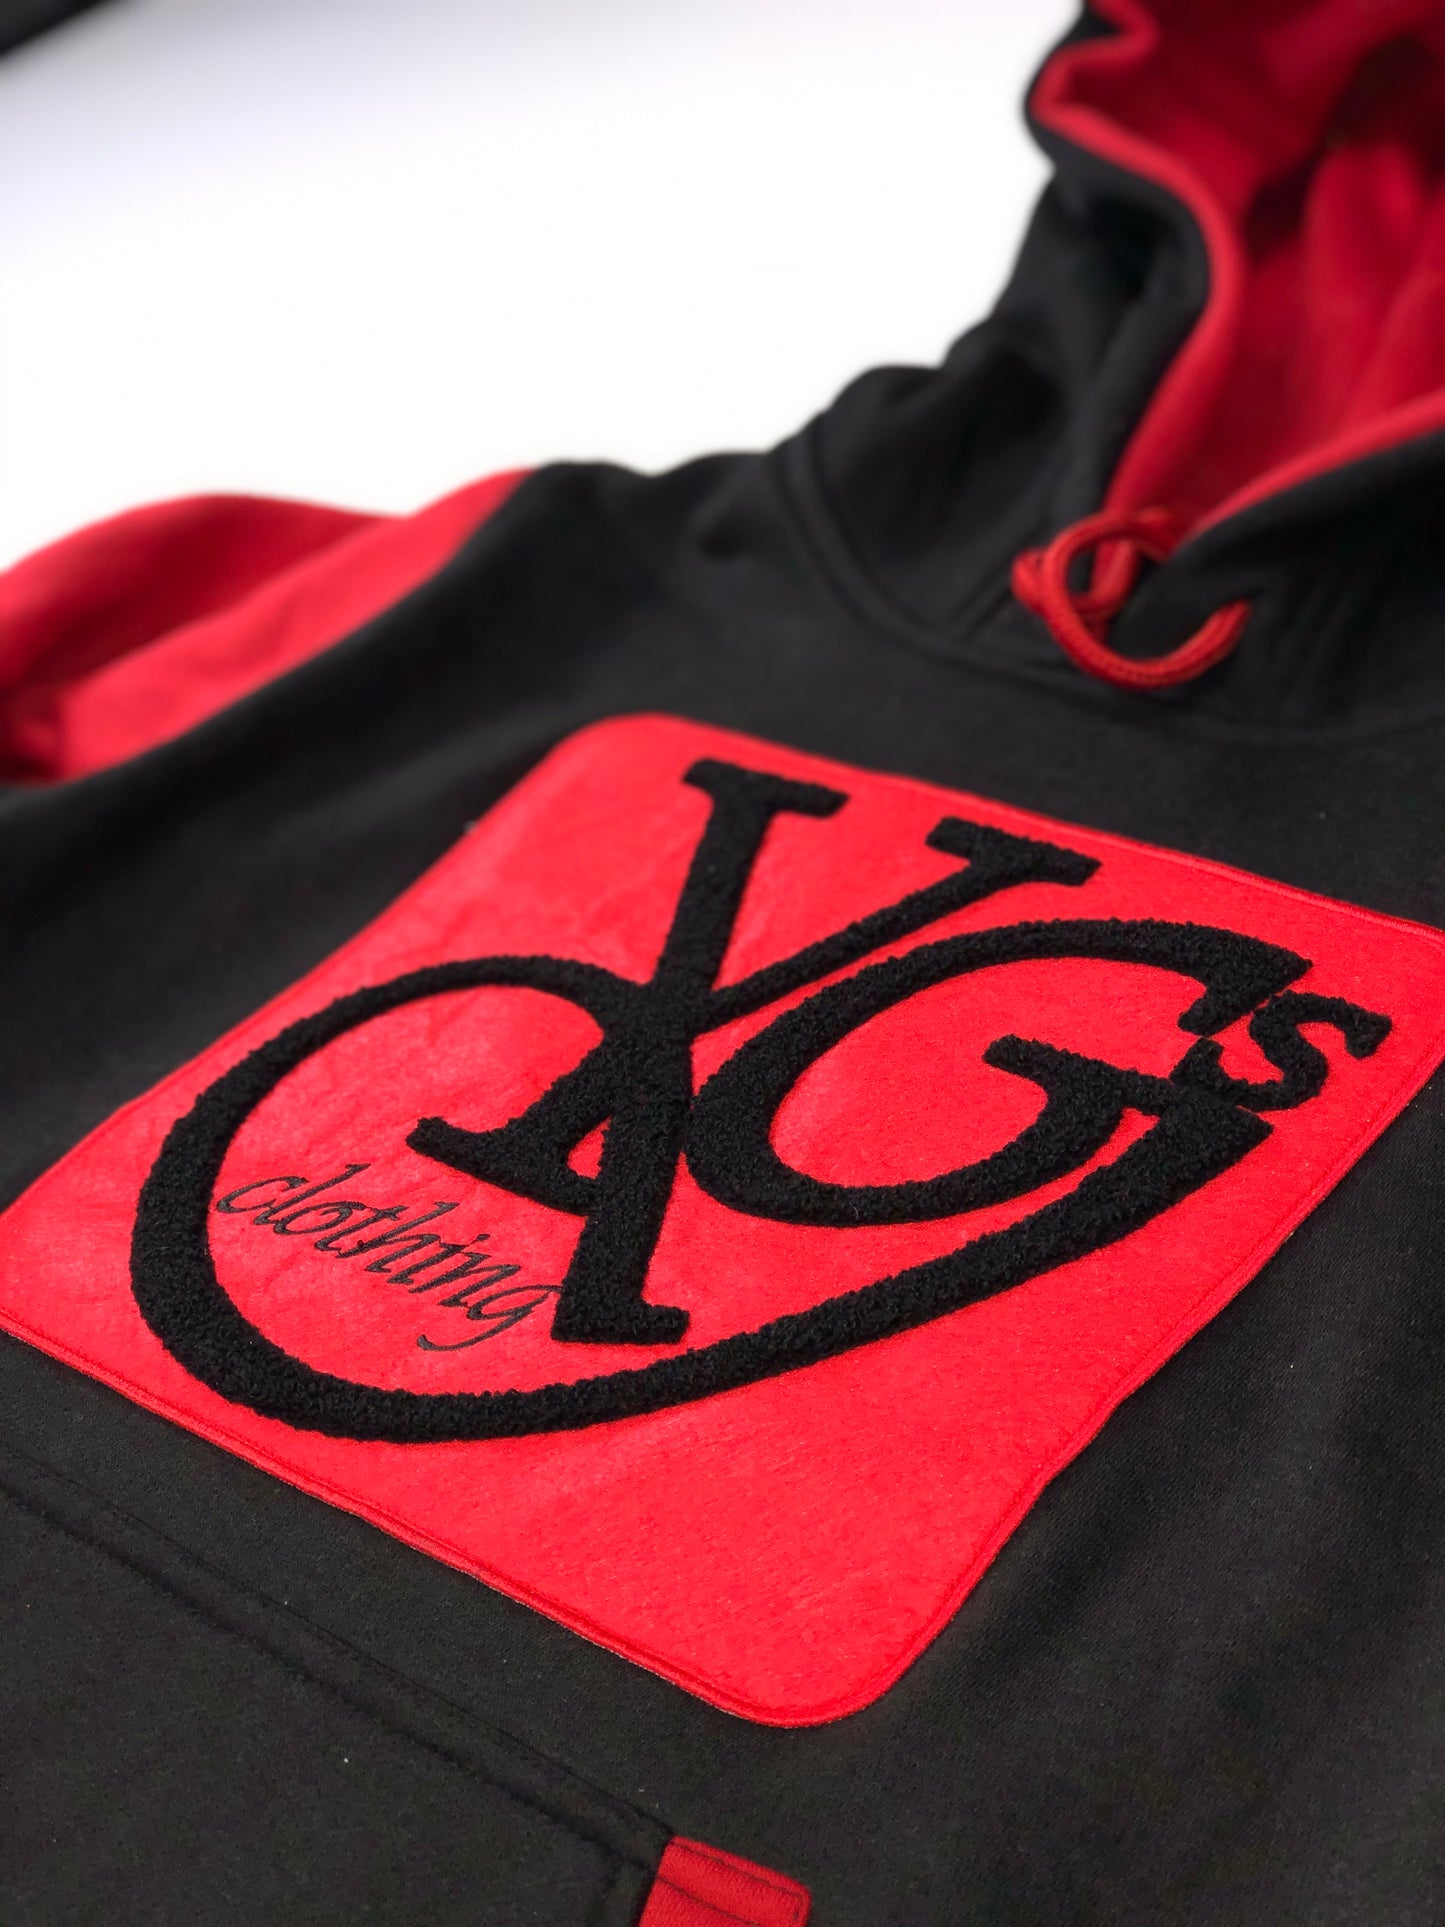 YGSC Chenille Logo Hooded Sweater